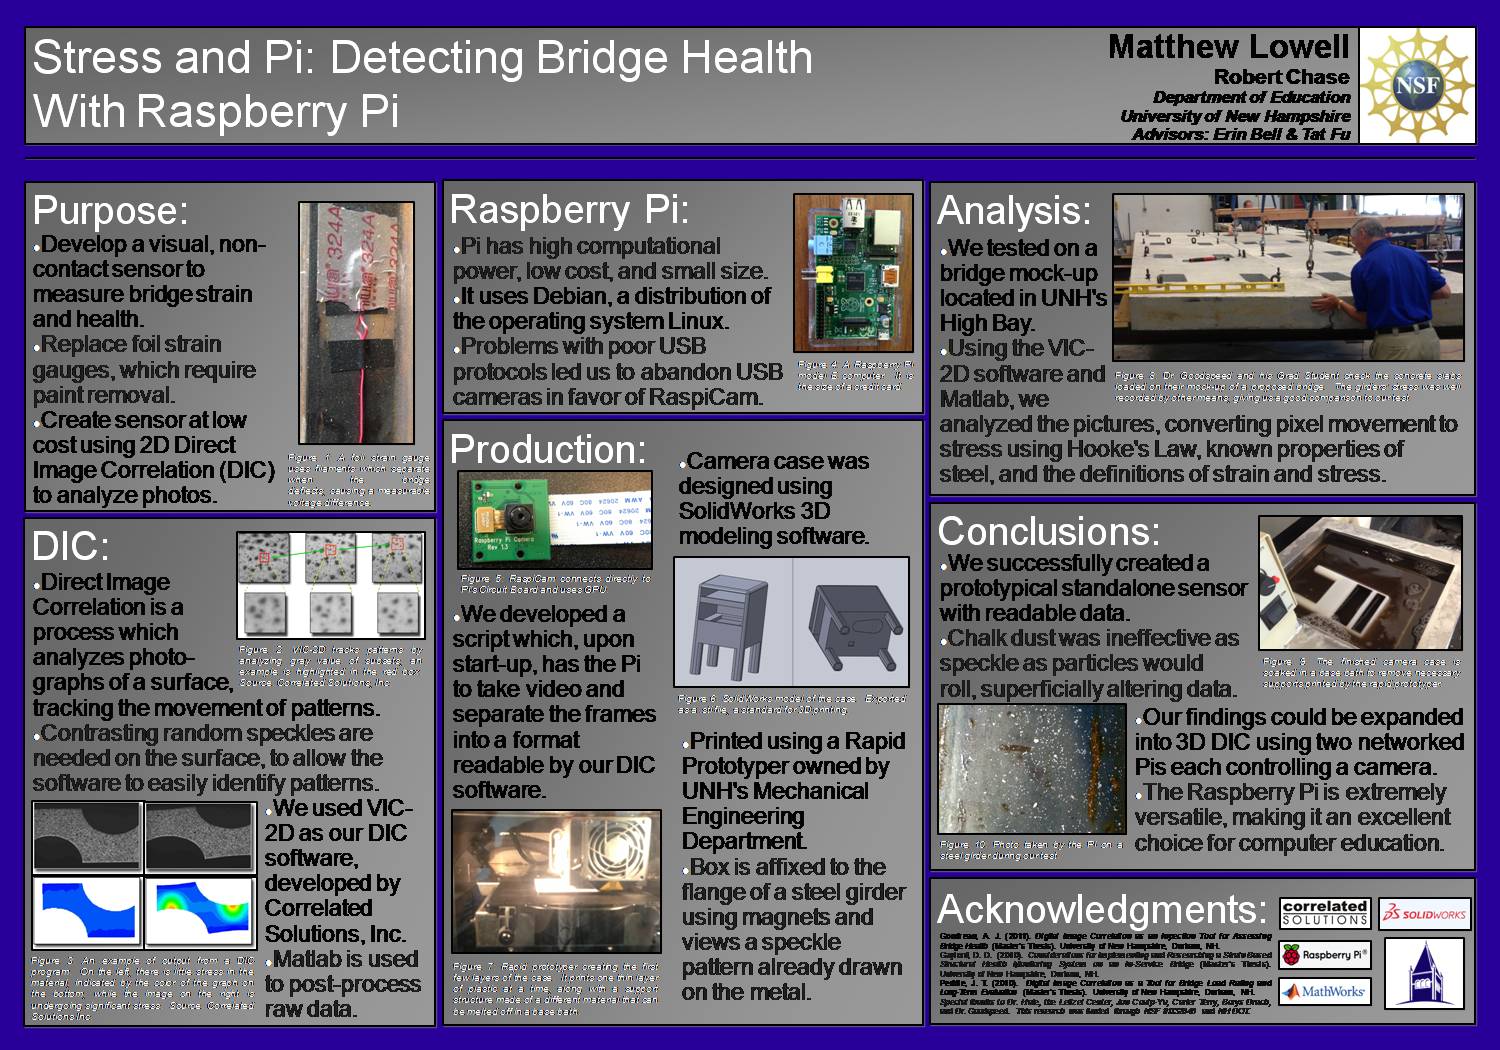 Stress And Pi: Detecting Bridge Health With Raspberry Pi by srhale